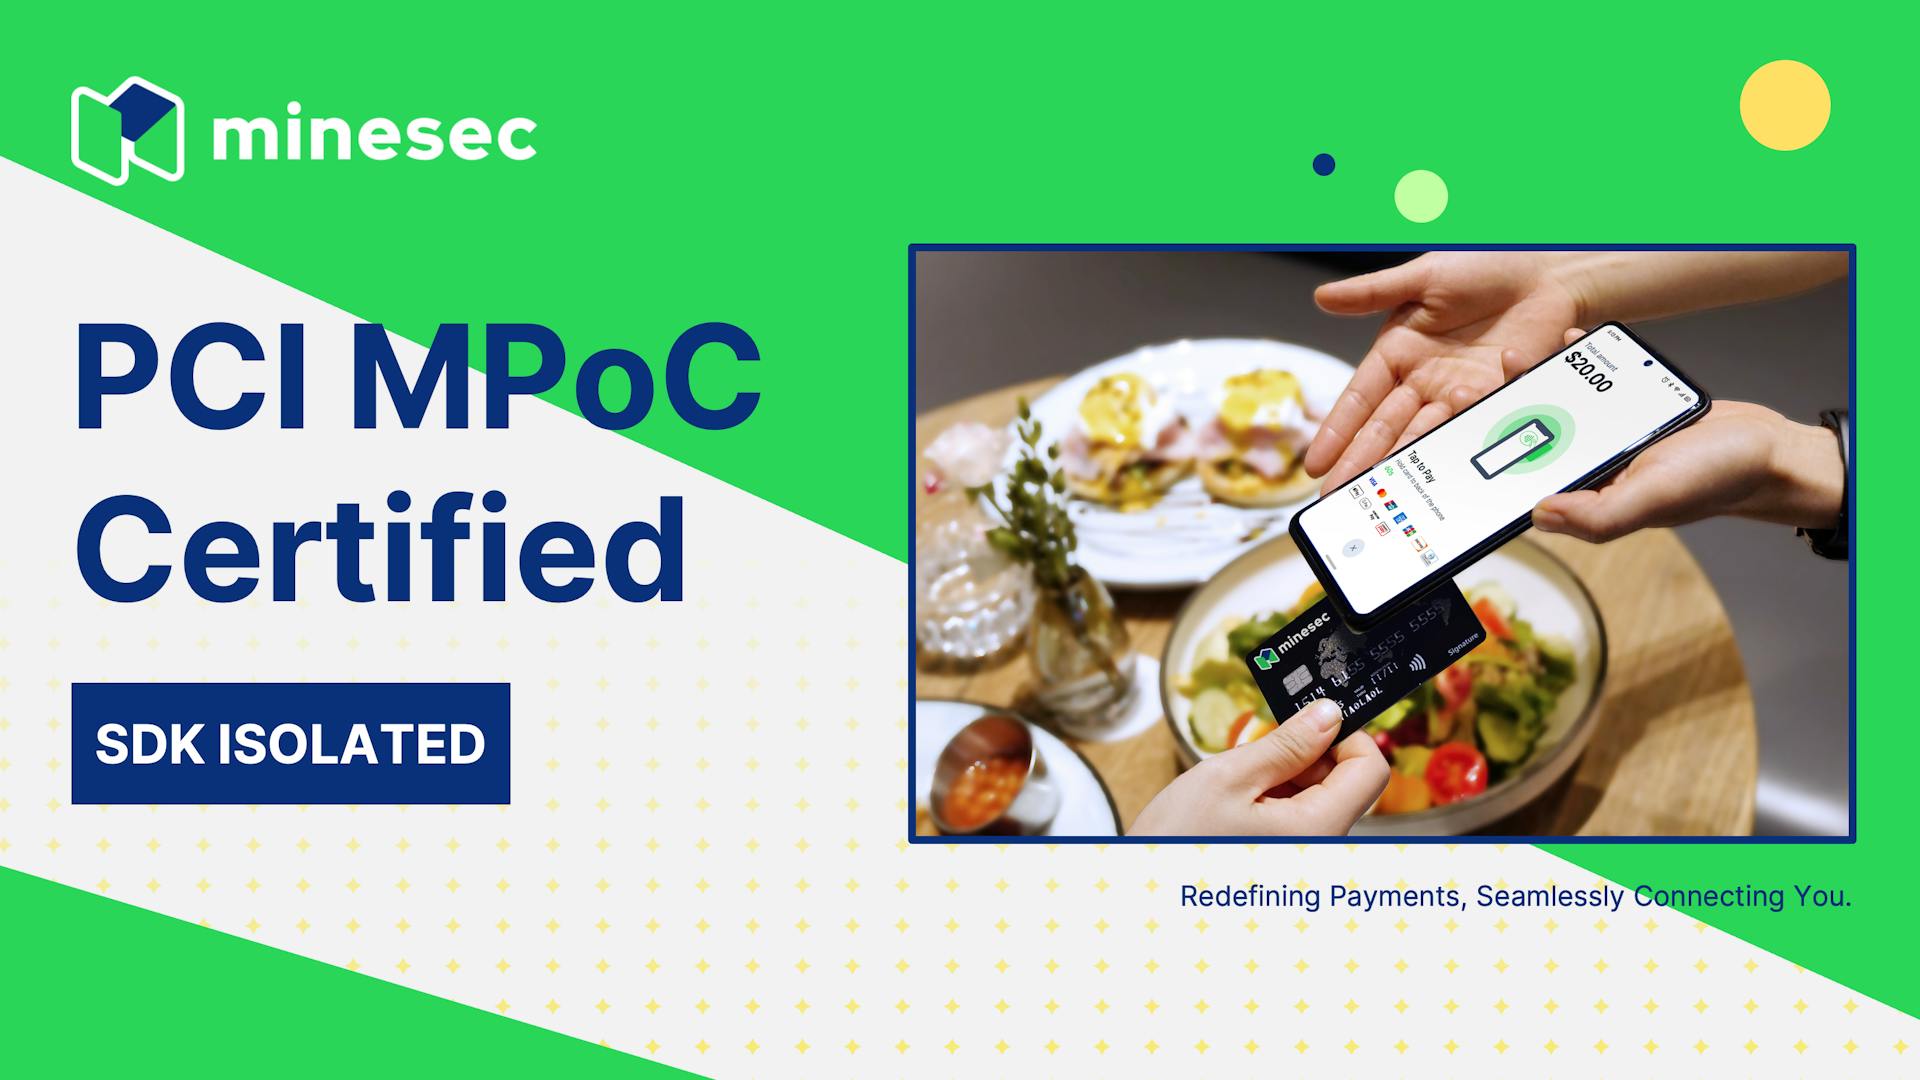 MineSec achieves PCI MPoC certification for Isolated SDK.